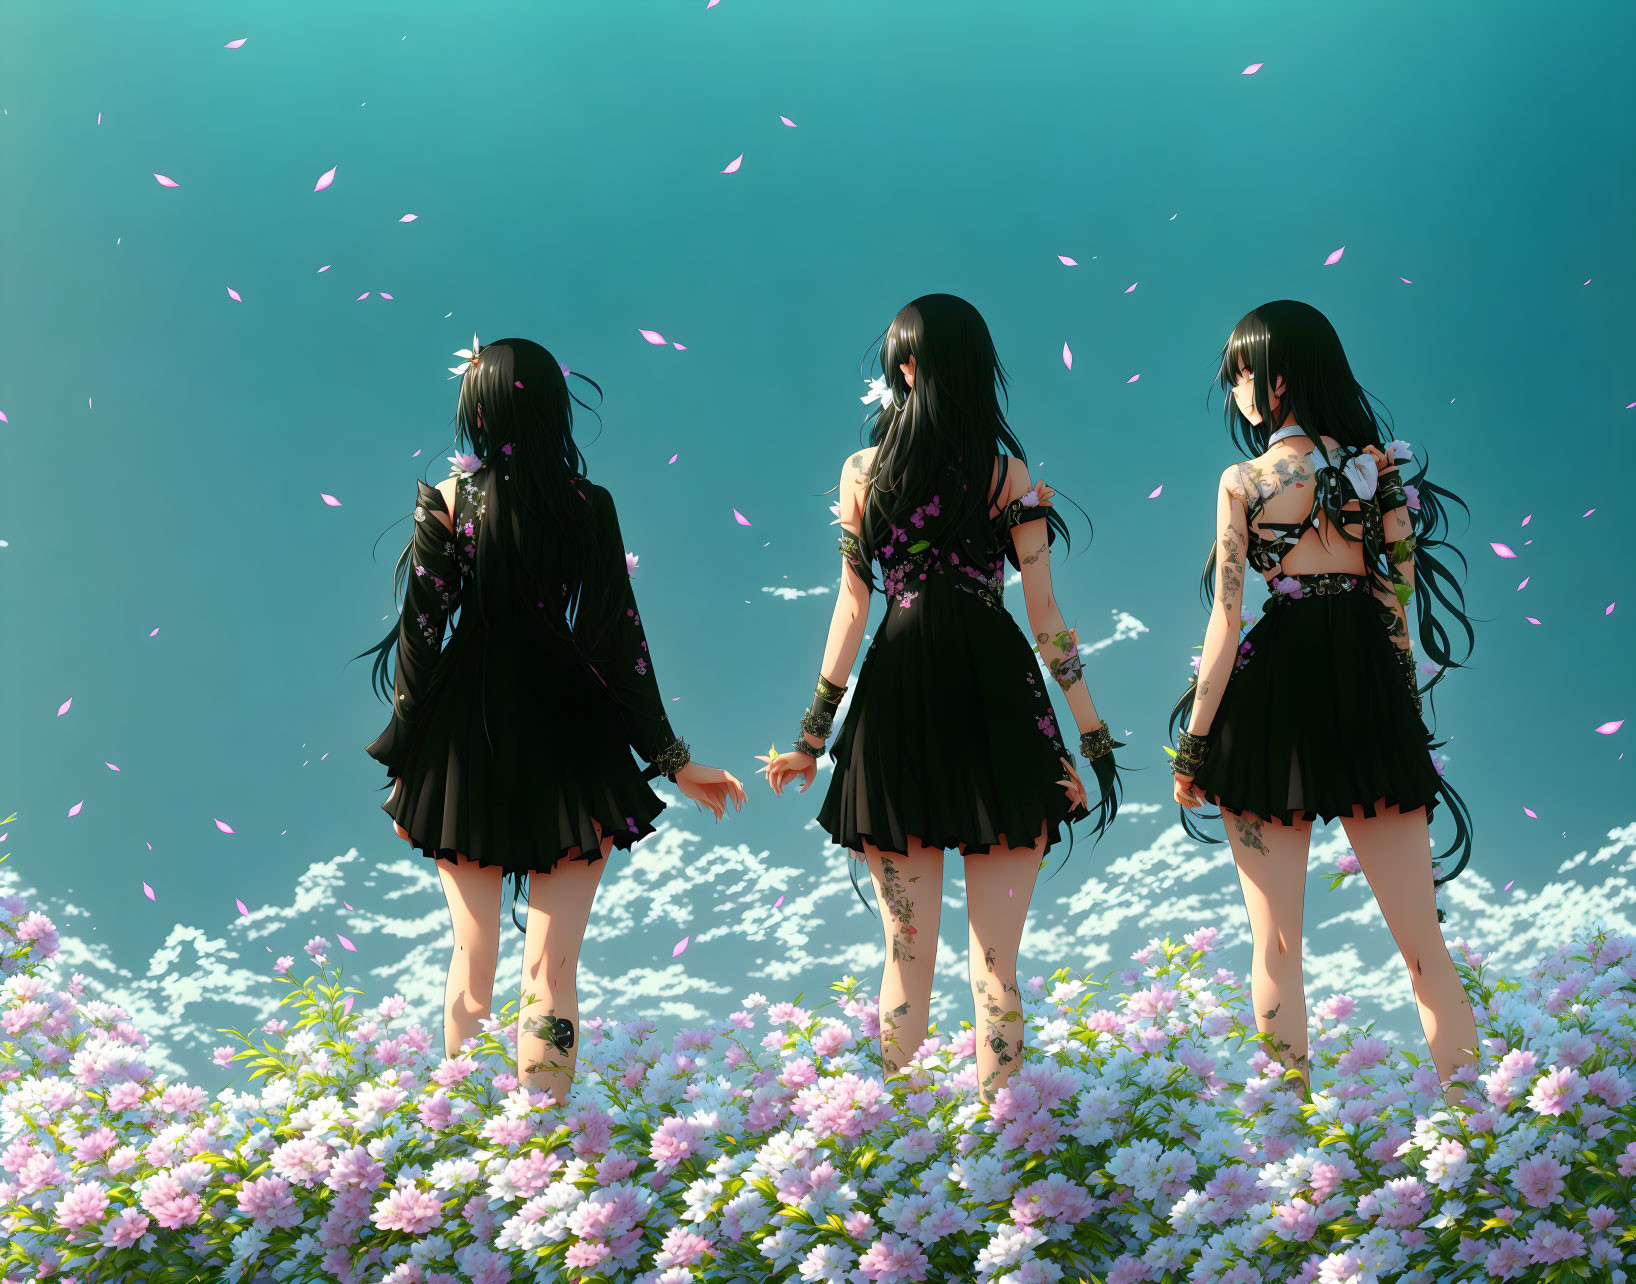 Three women in black floral dresses holding hands in pink flower field with teal background.